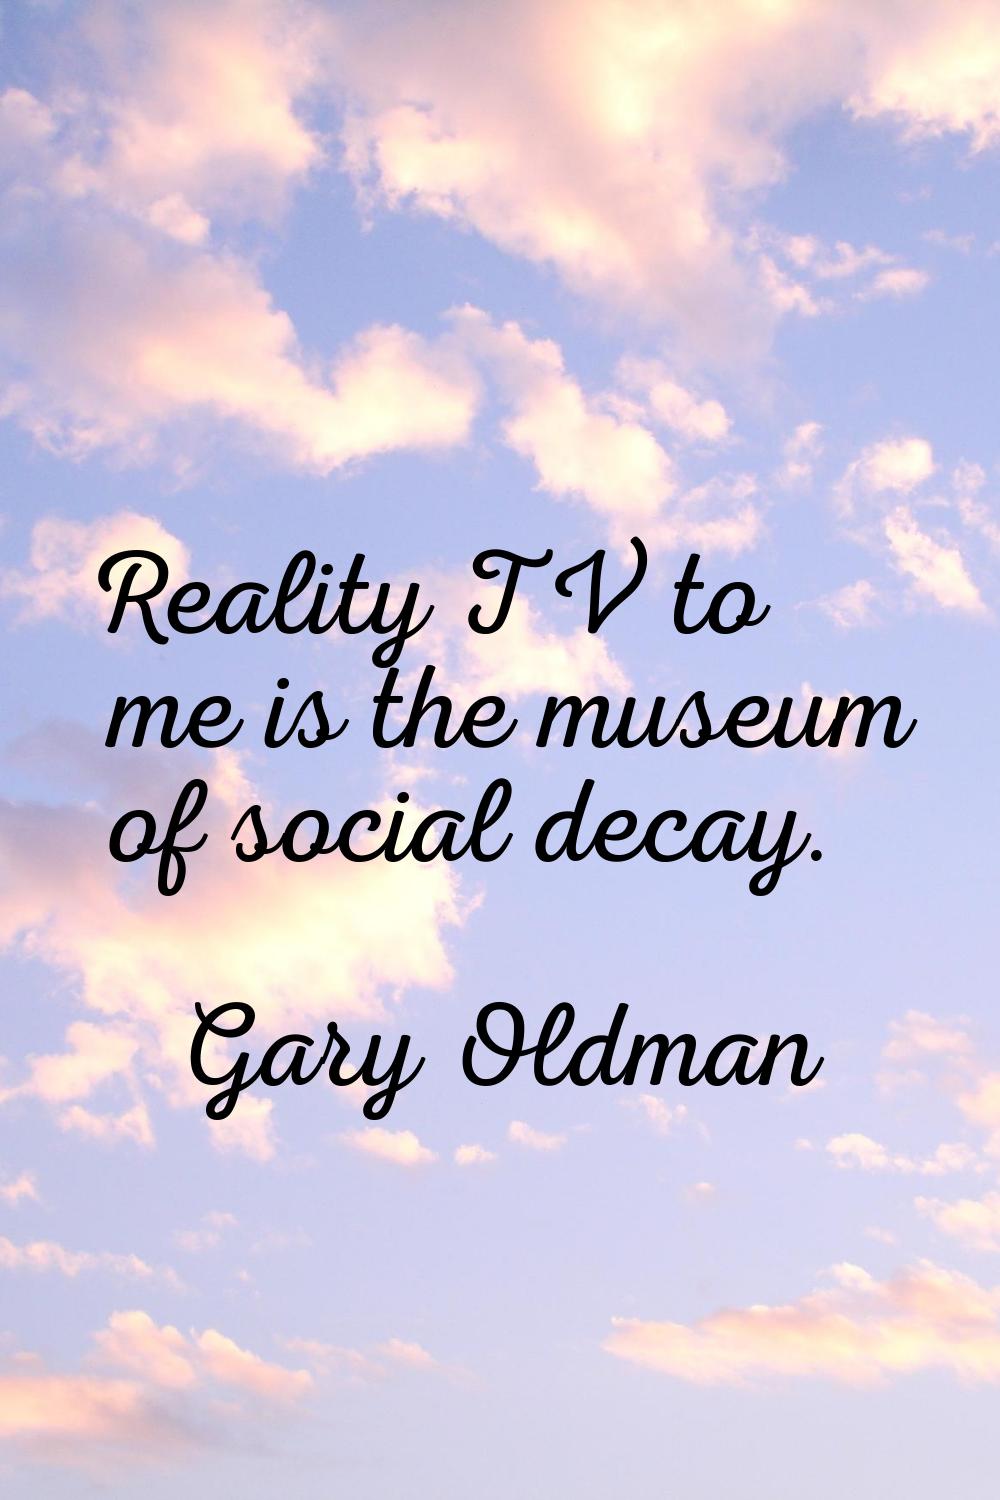 Reality TV to me is the museum of social decay.